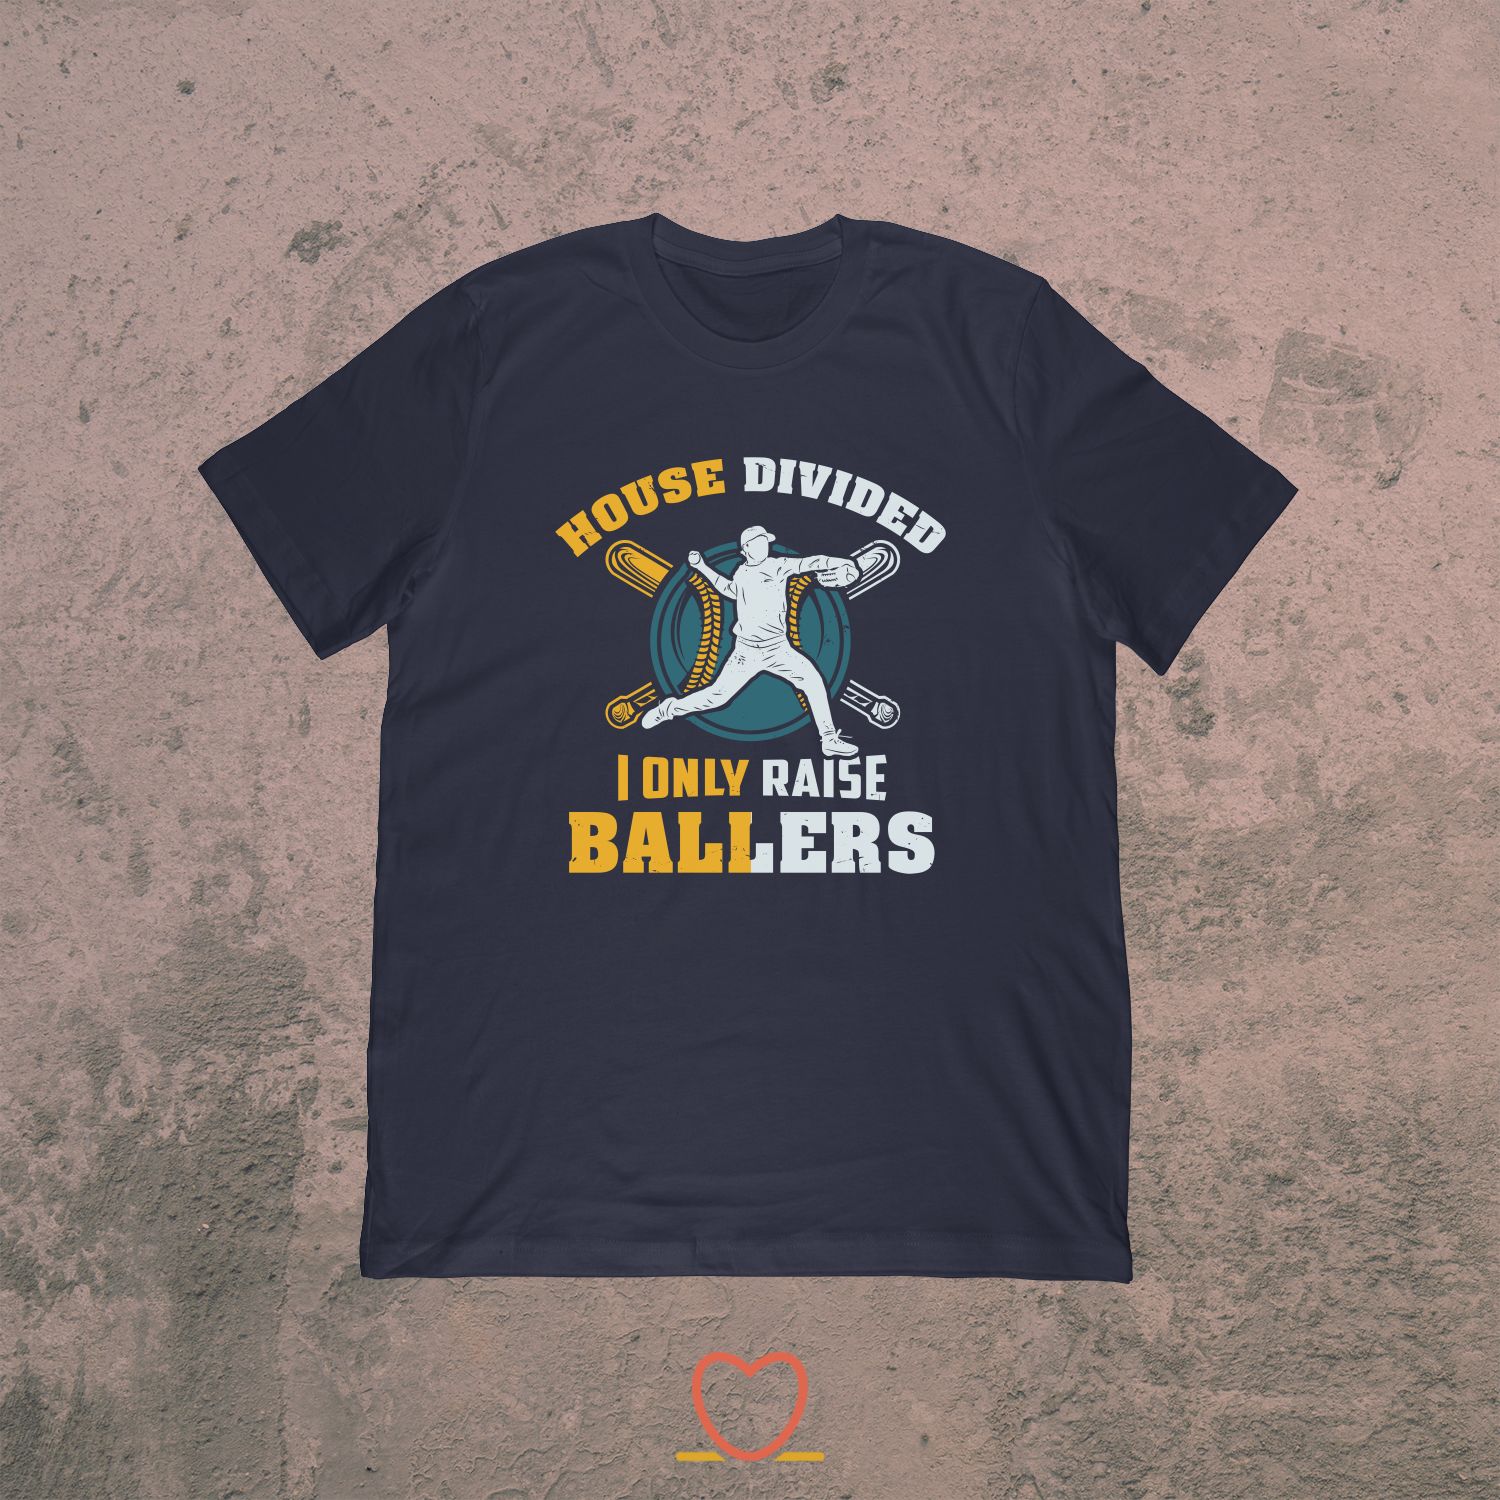 House Divided I Only Raise Ballers – Funny Sports Tee